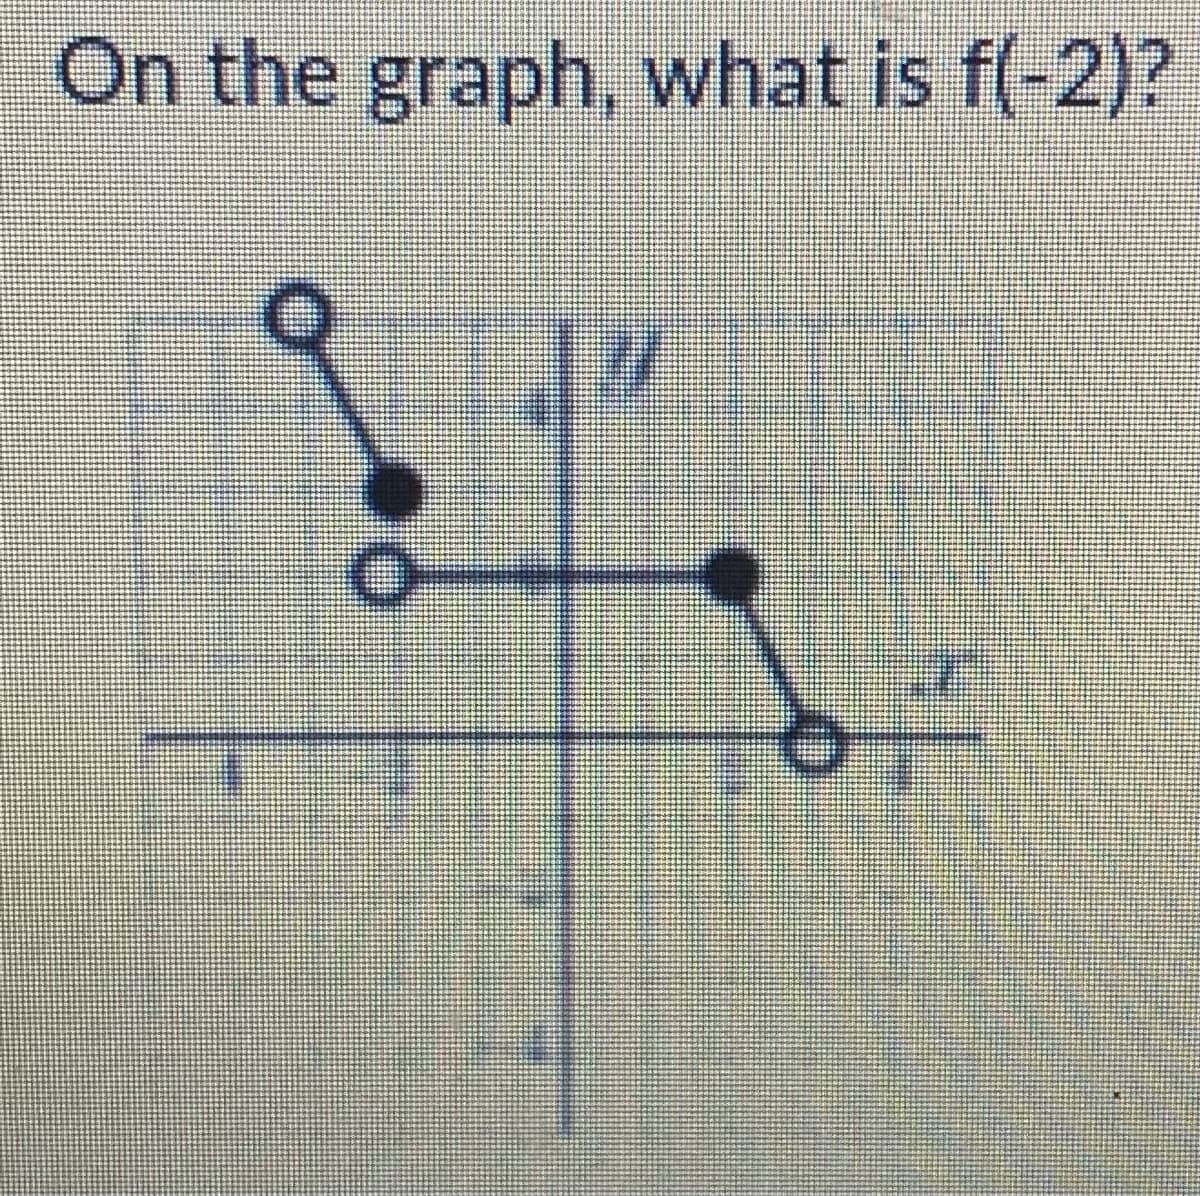 On the graph, what is f(-2)?